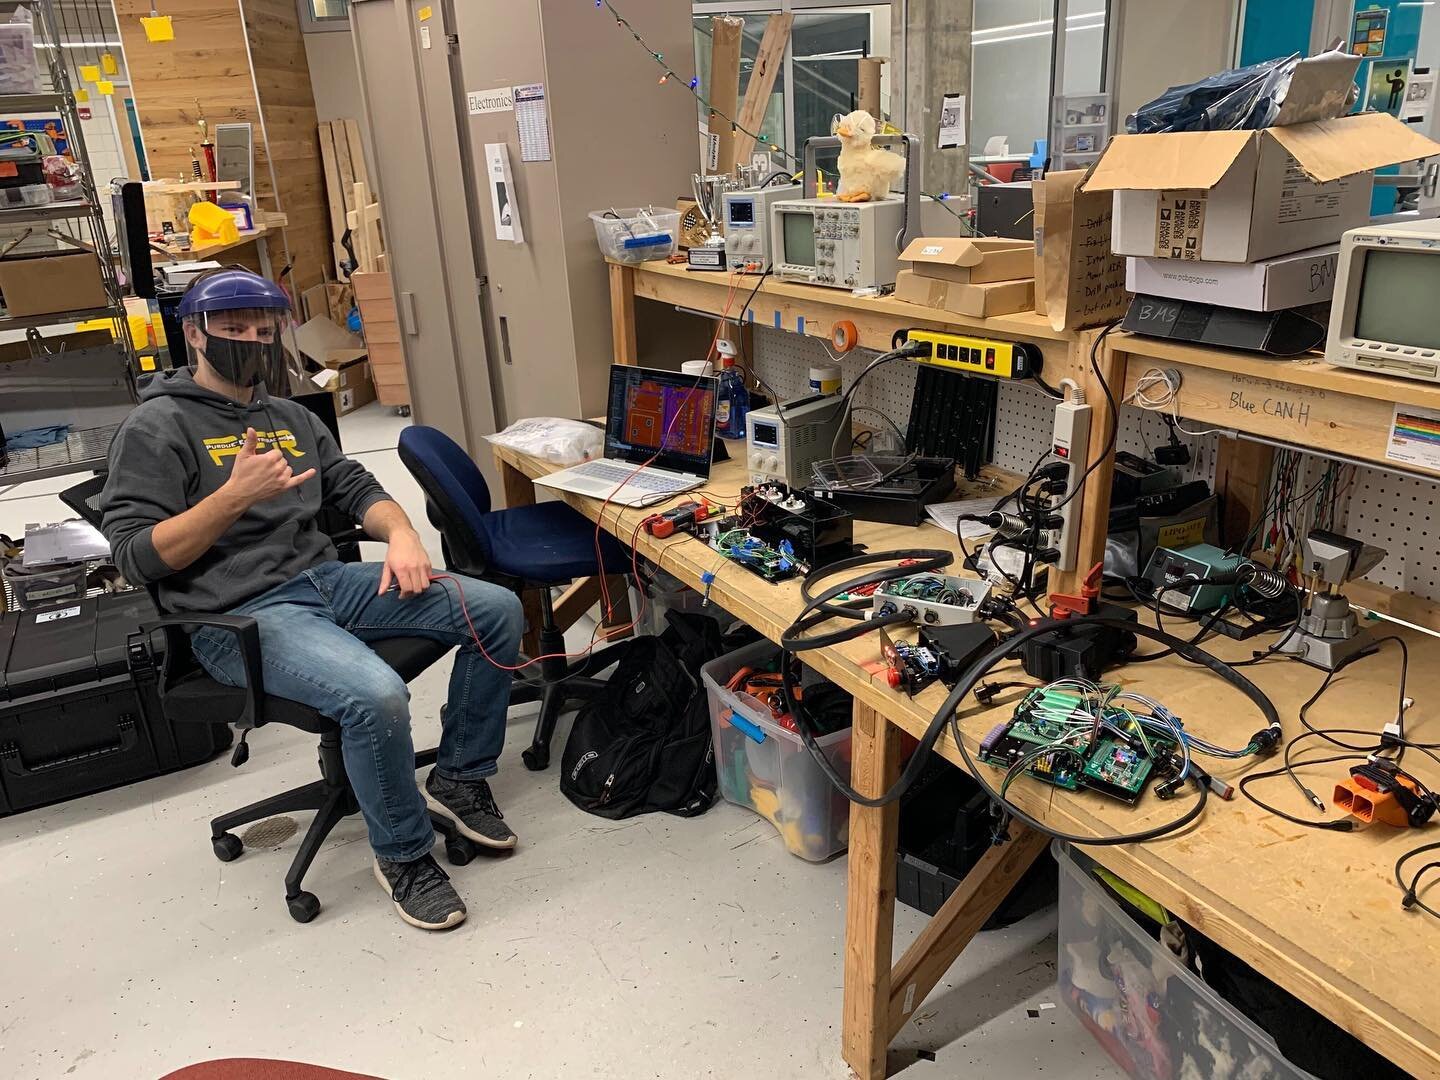 Our electronics sub-team is back in the shop and ready to tackle the upcoming year!
 
 
#purdueuniveristy #purdueengineers  #formulasae #formula #electricracing #fsae #racecar #racing #engineering